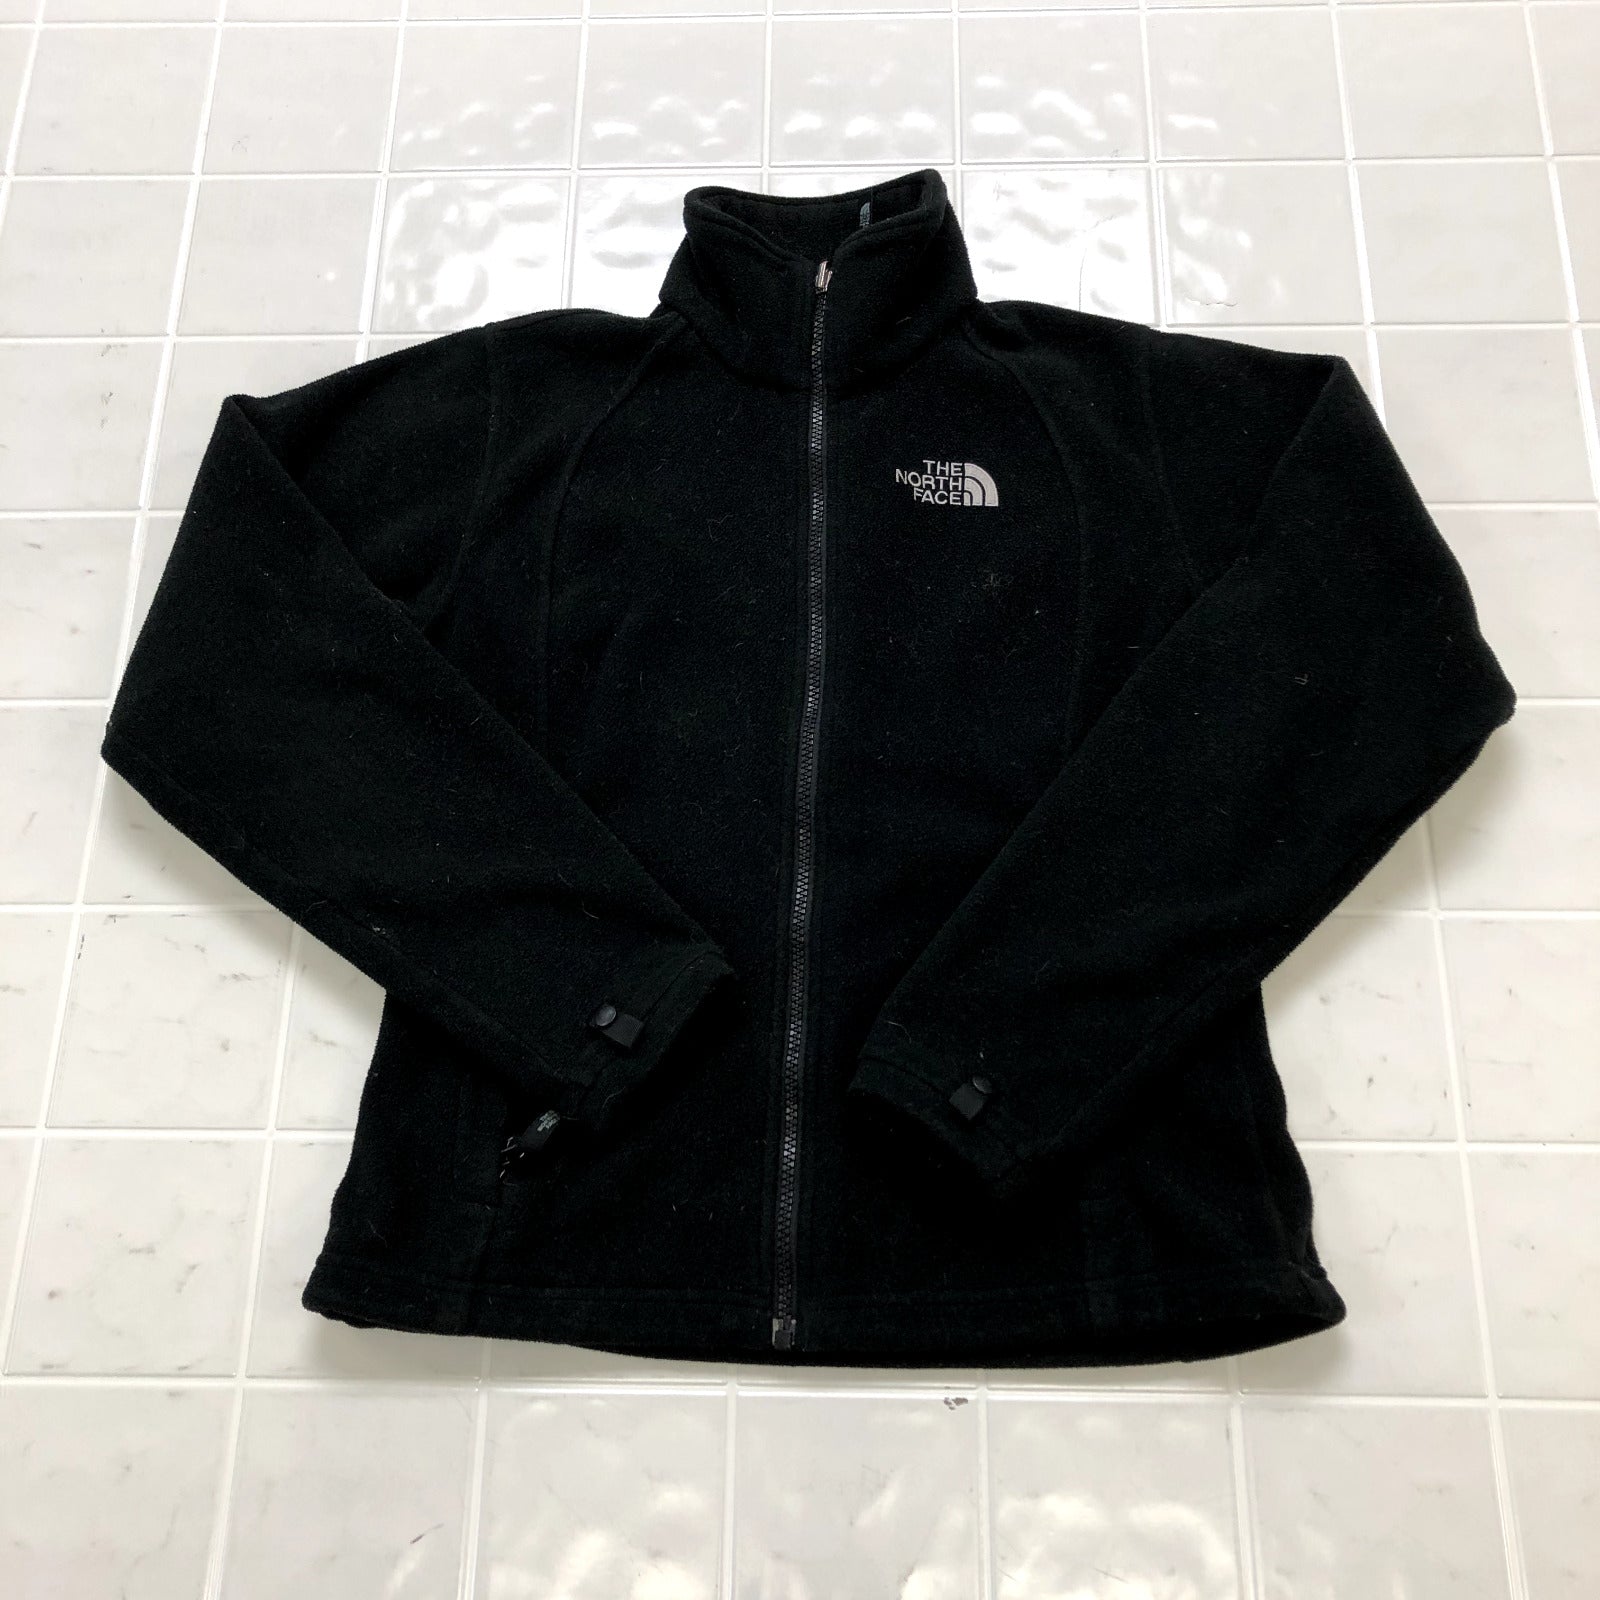 The North Face Black Embroidered Logo Fleece Basic Jacket Women's Size XS